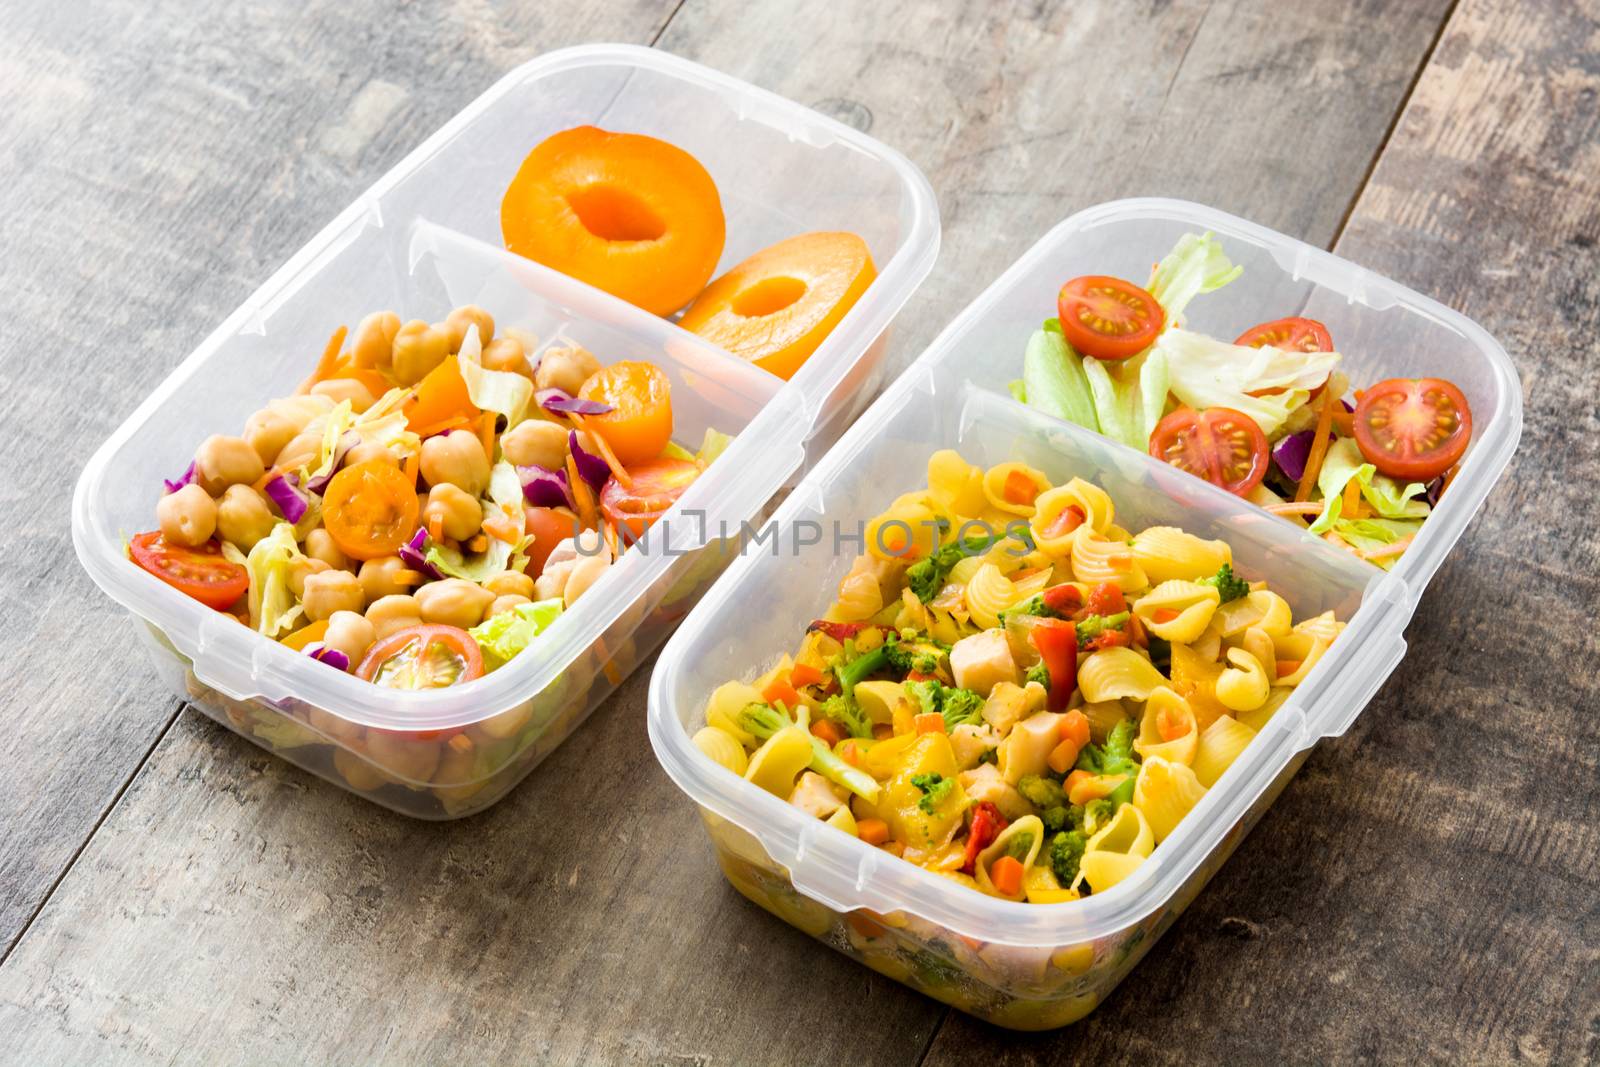 Lunch box with healthy food ready to eat on wooden table